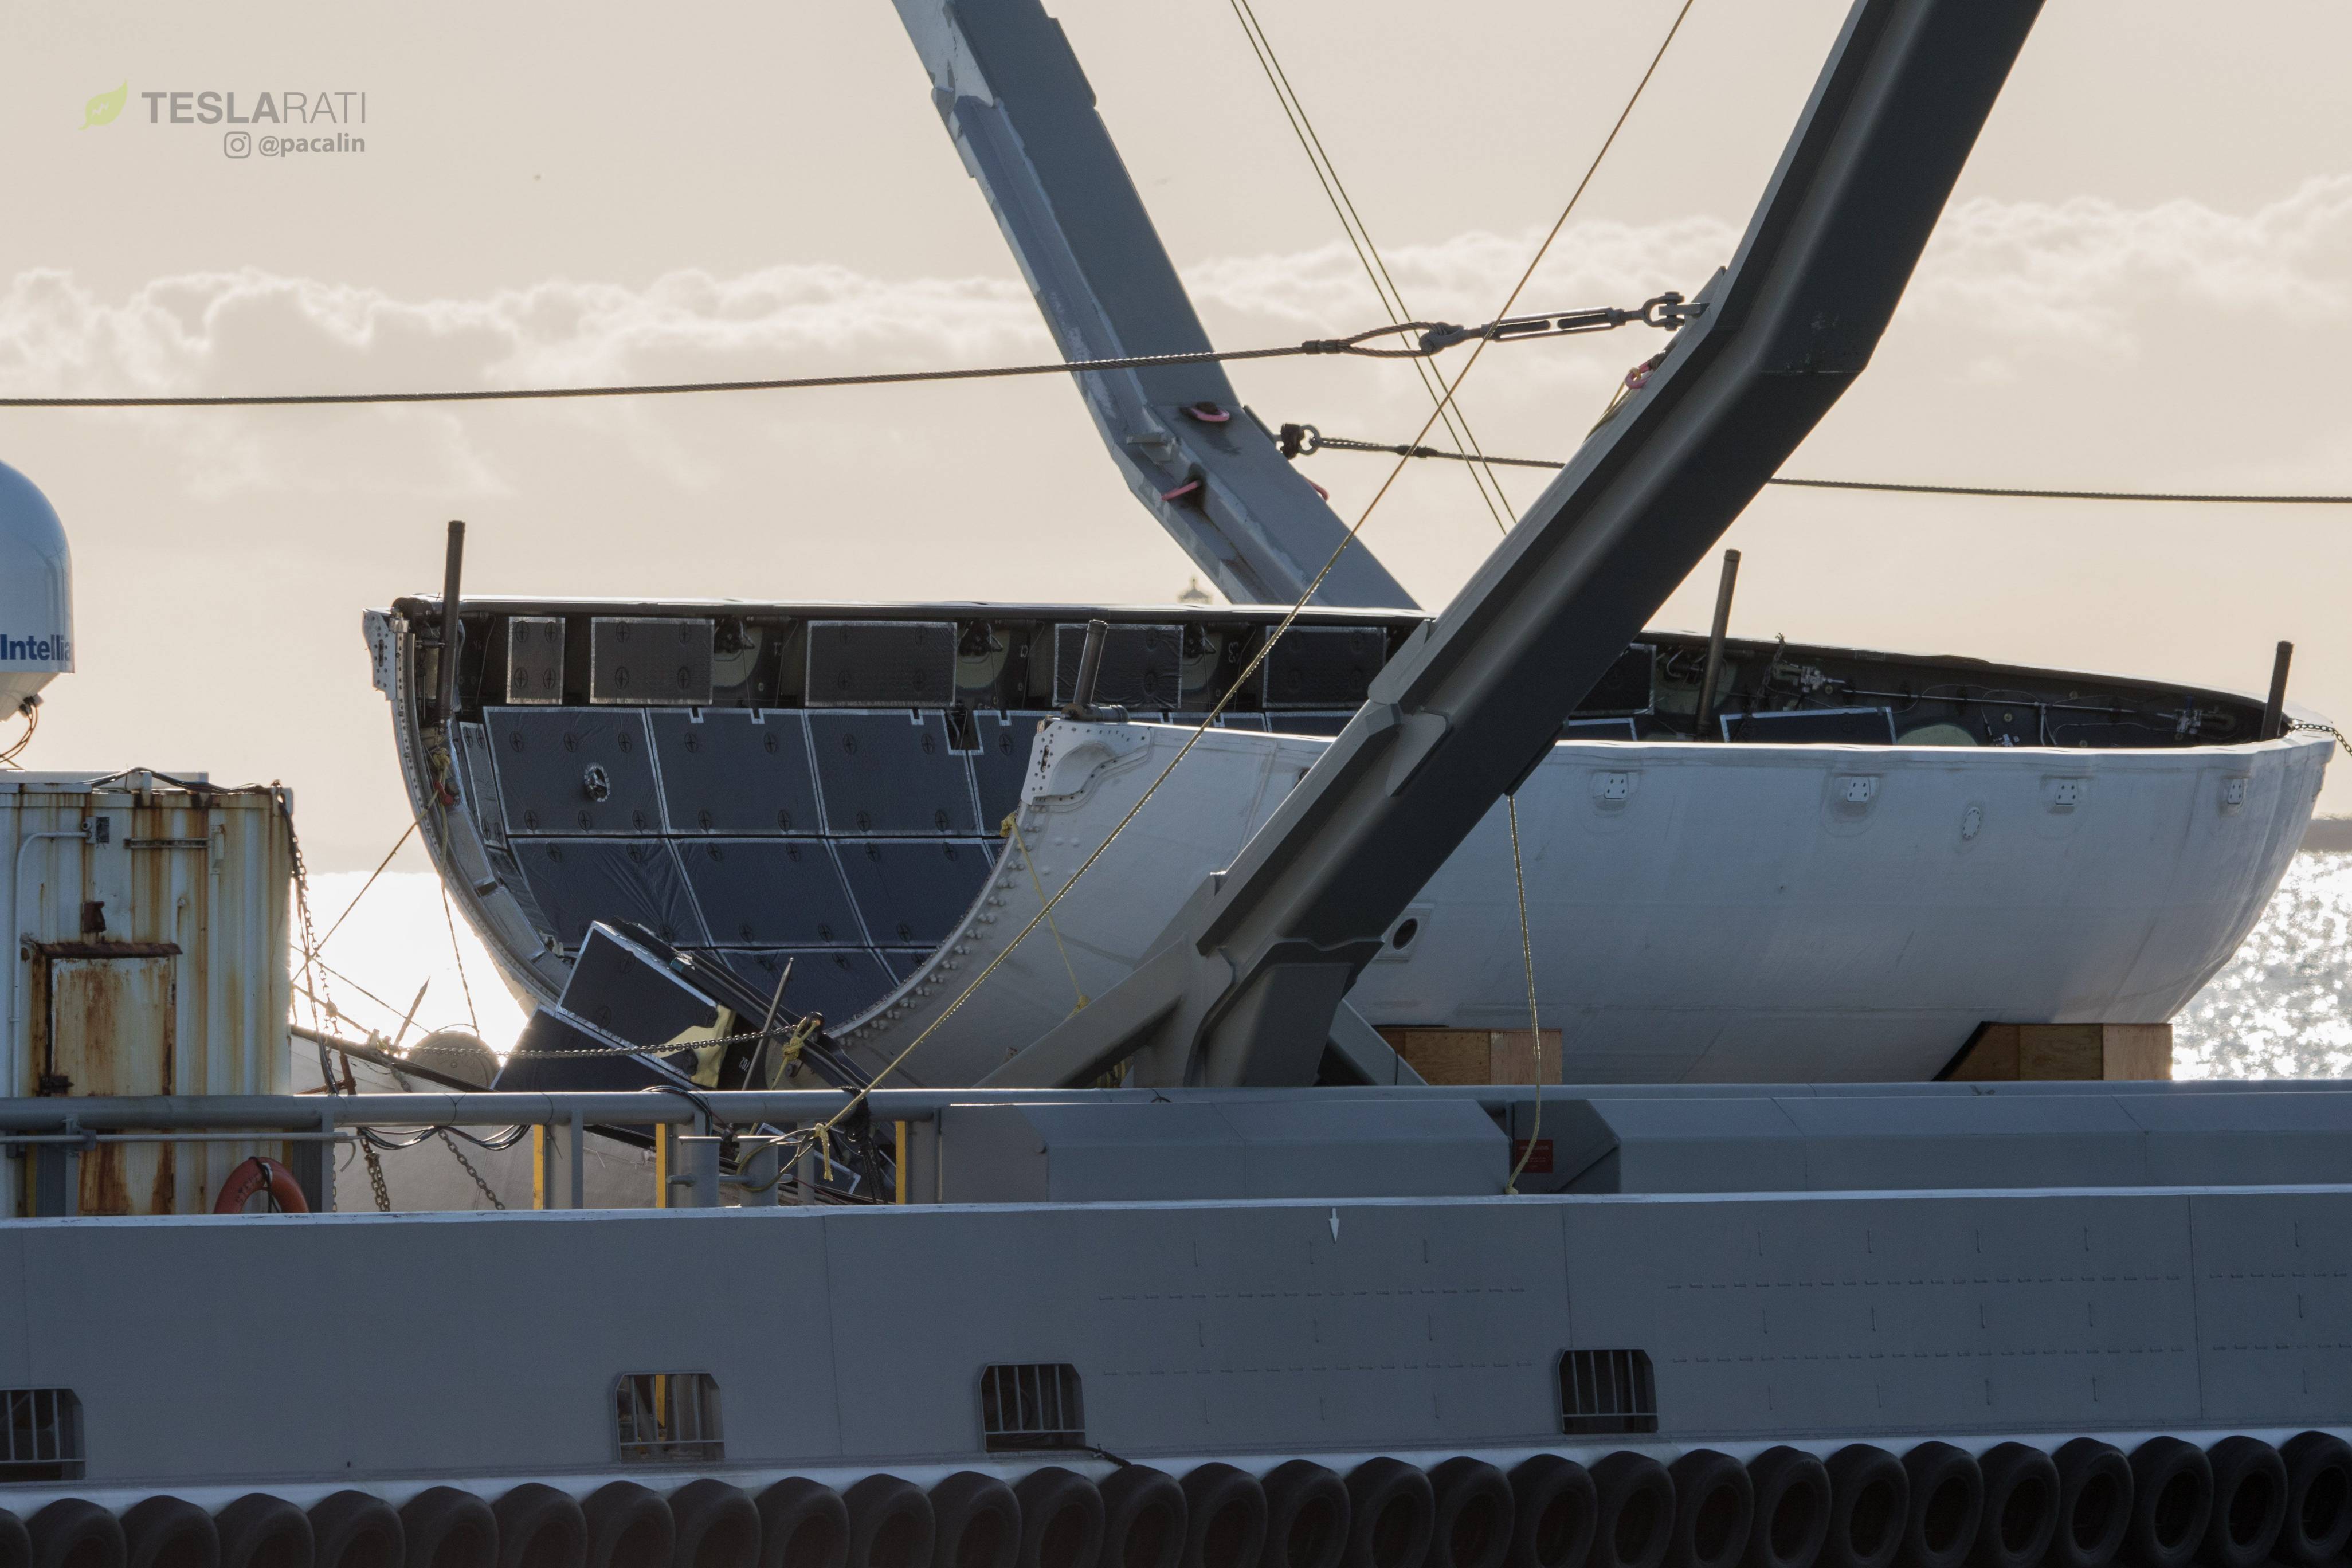 SpaceX Fairing Logo - SpaceX's recovered fairing spotted sailing into port on Mr Steven